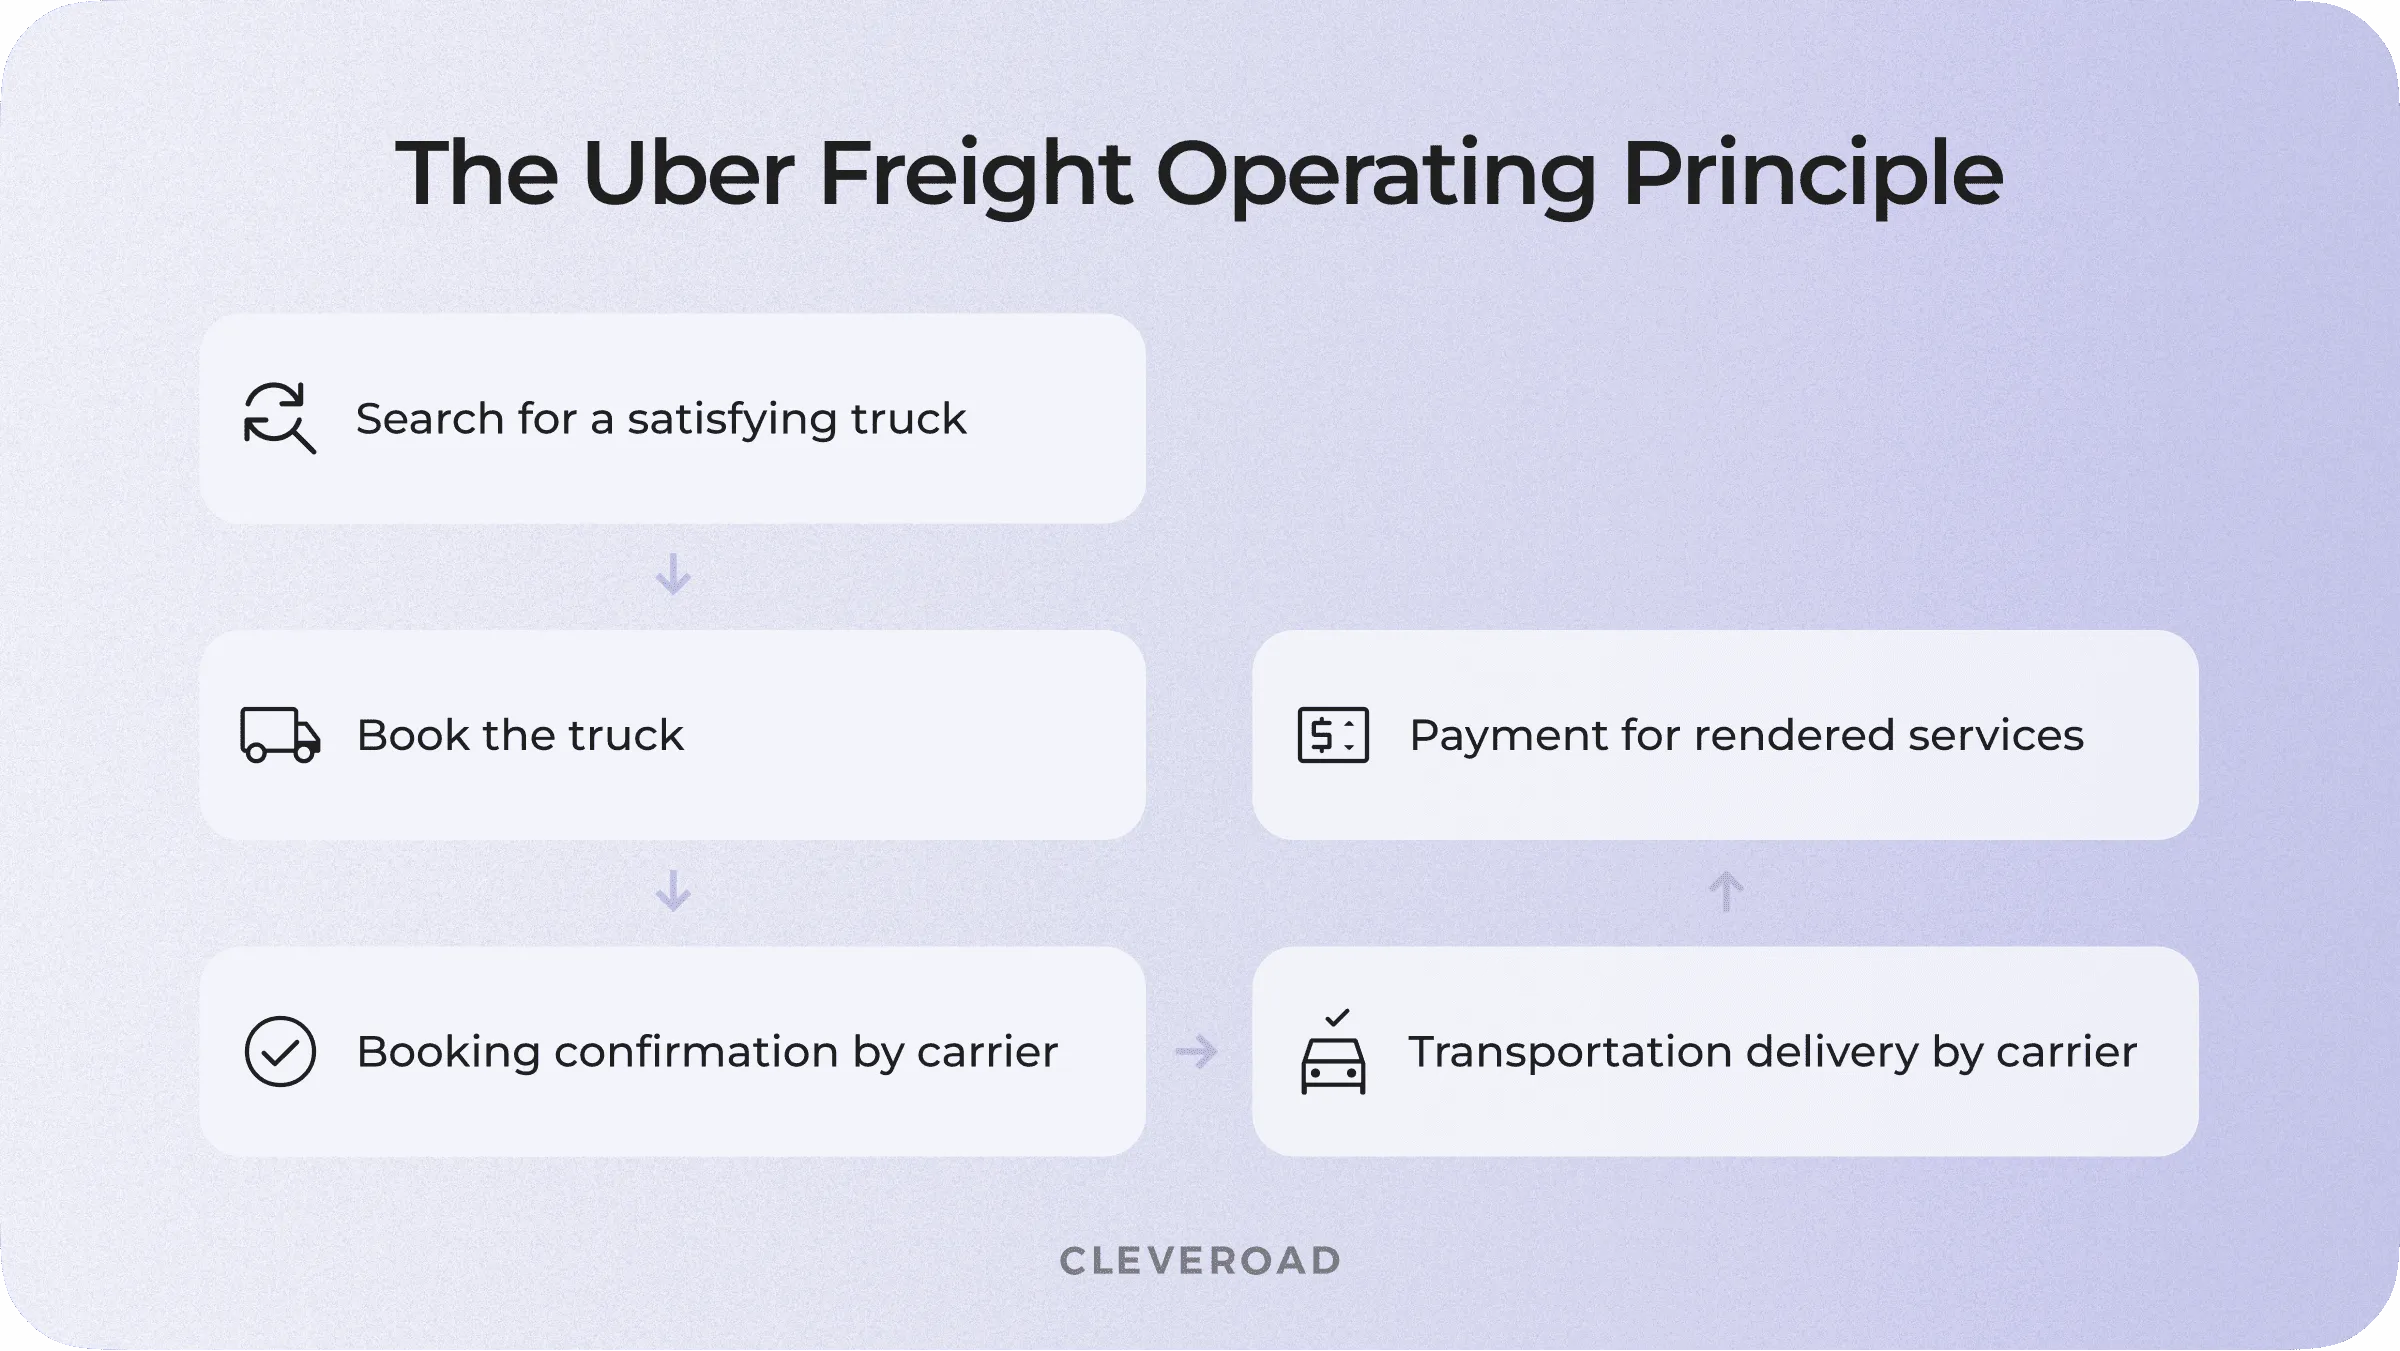 Uber Freight’s operating principle